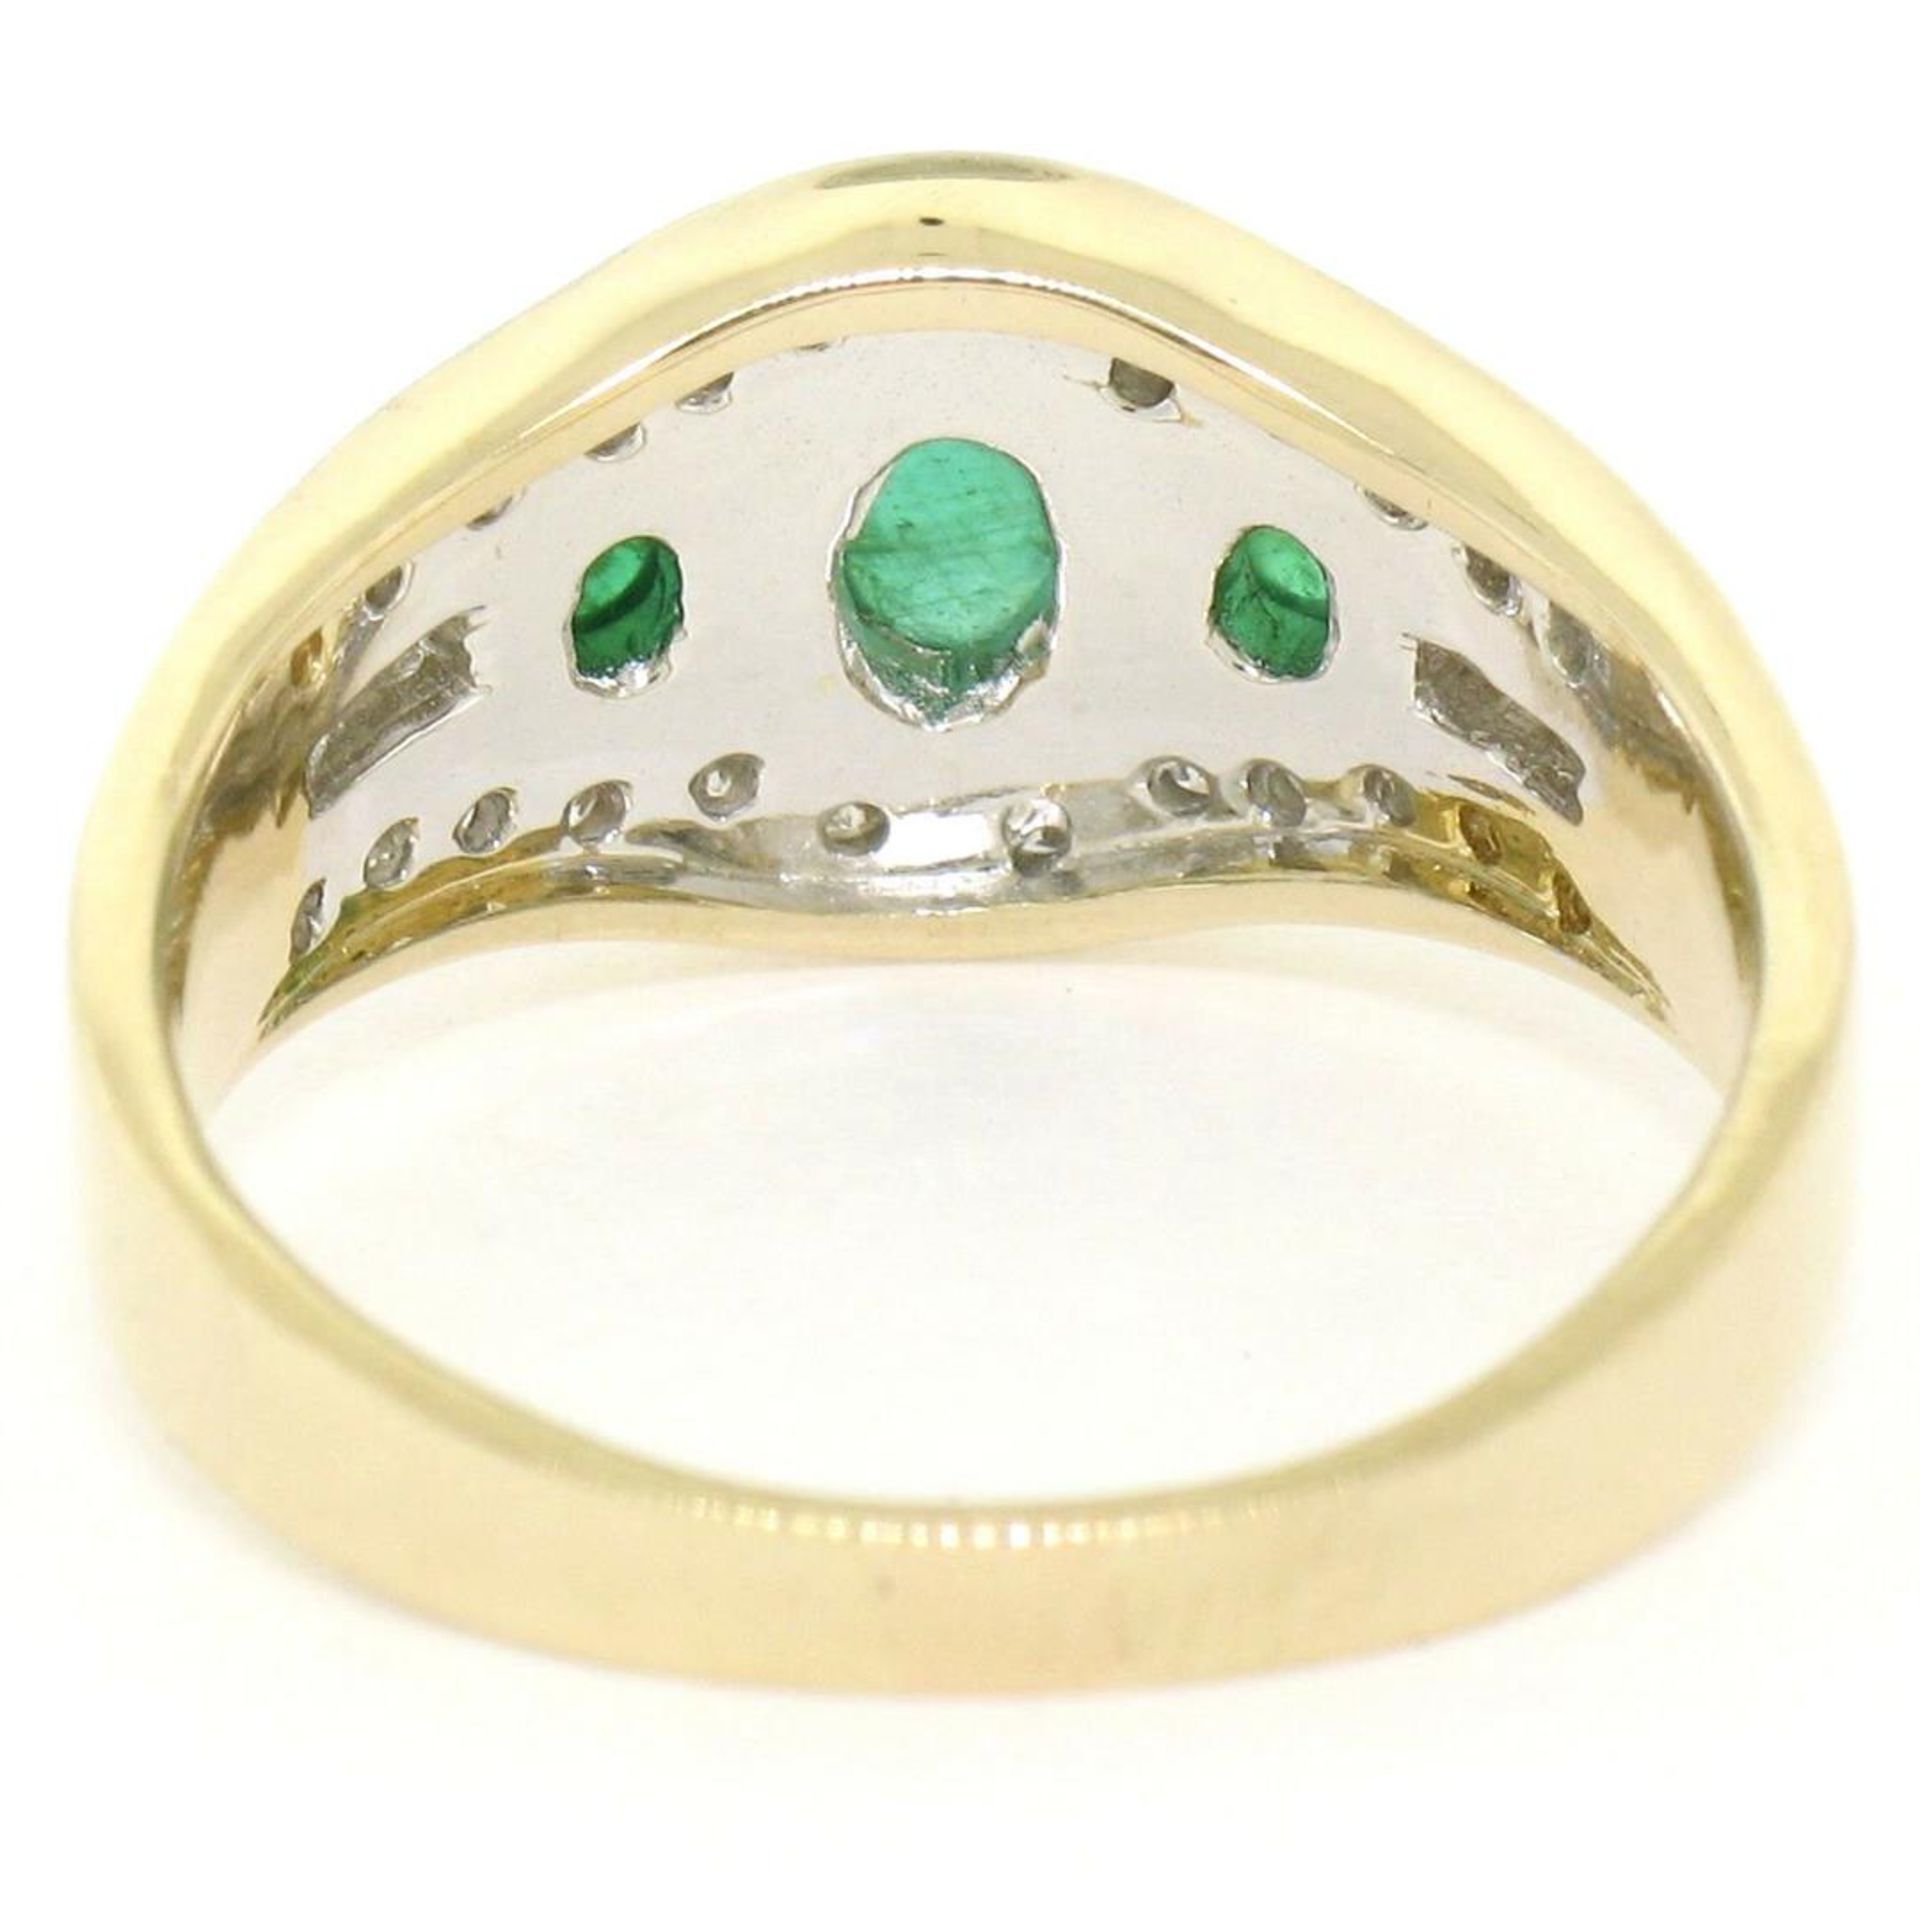 Petite 14K TT Gold 0.68 ctw 3 Cabochon Emerald & Diamond Accented Cocktail Ring - Image 4 of 9